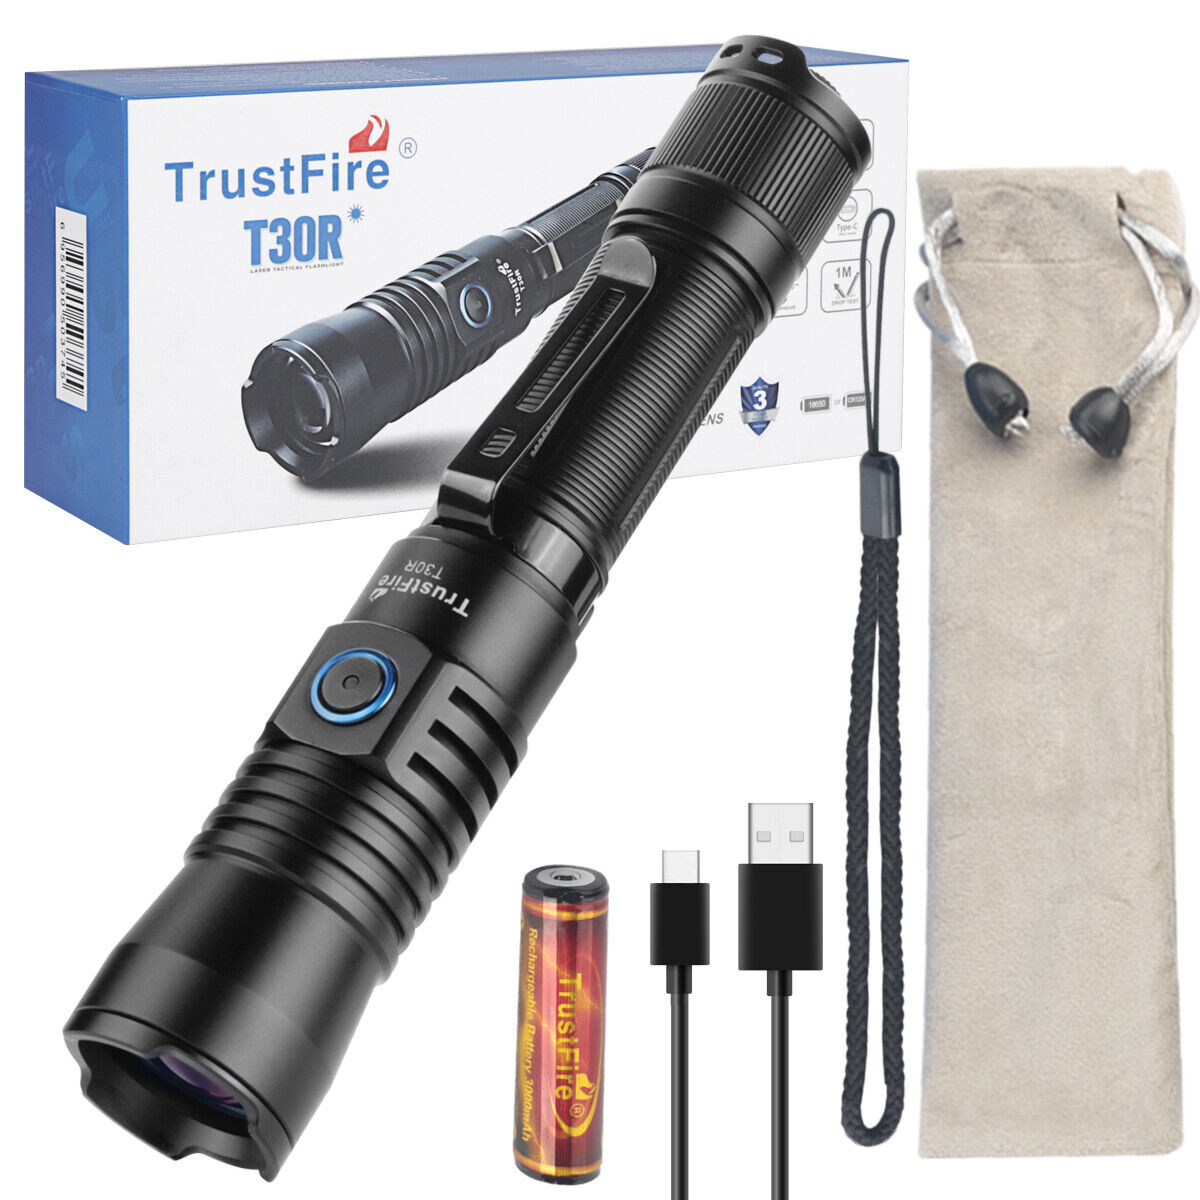 TrustFire T30R LEP 460LM USB Type-C Charging Laser Tactical